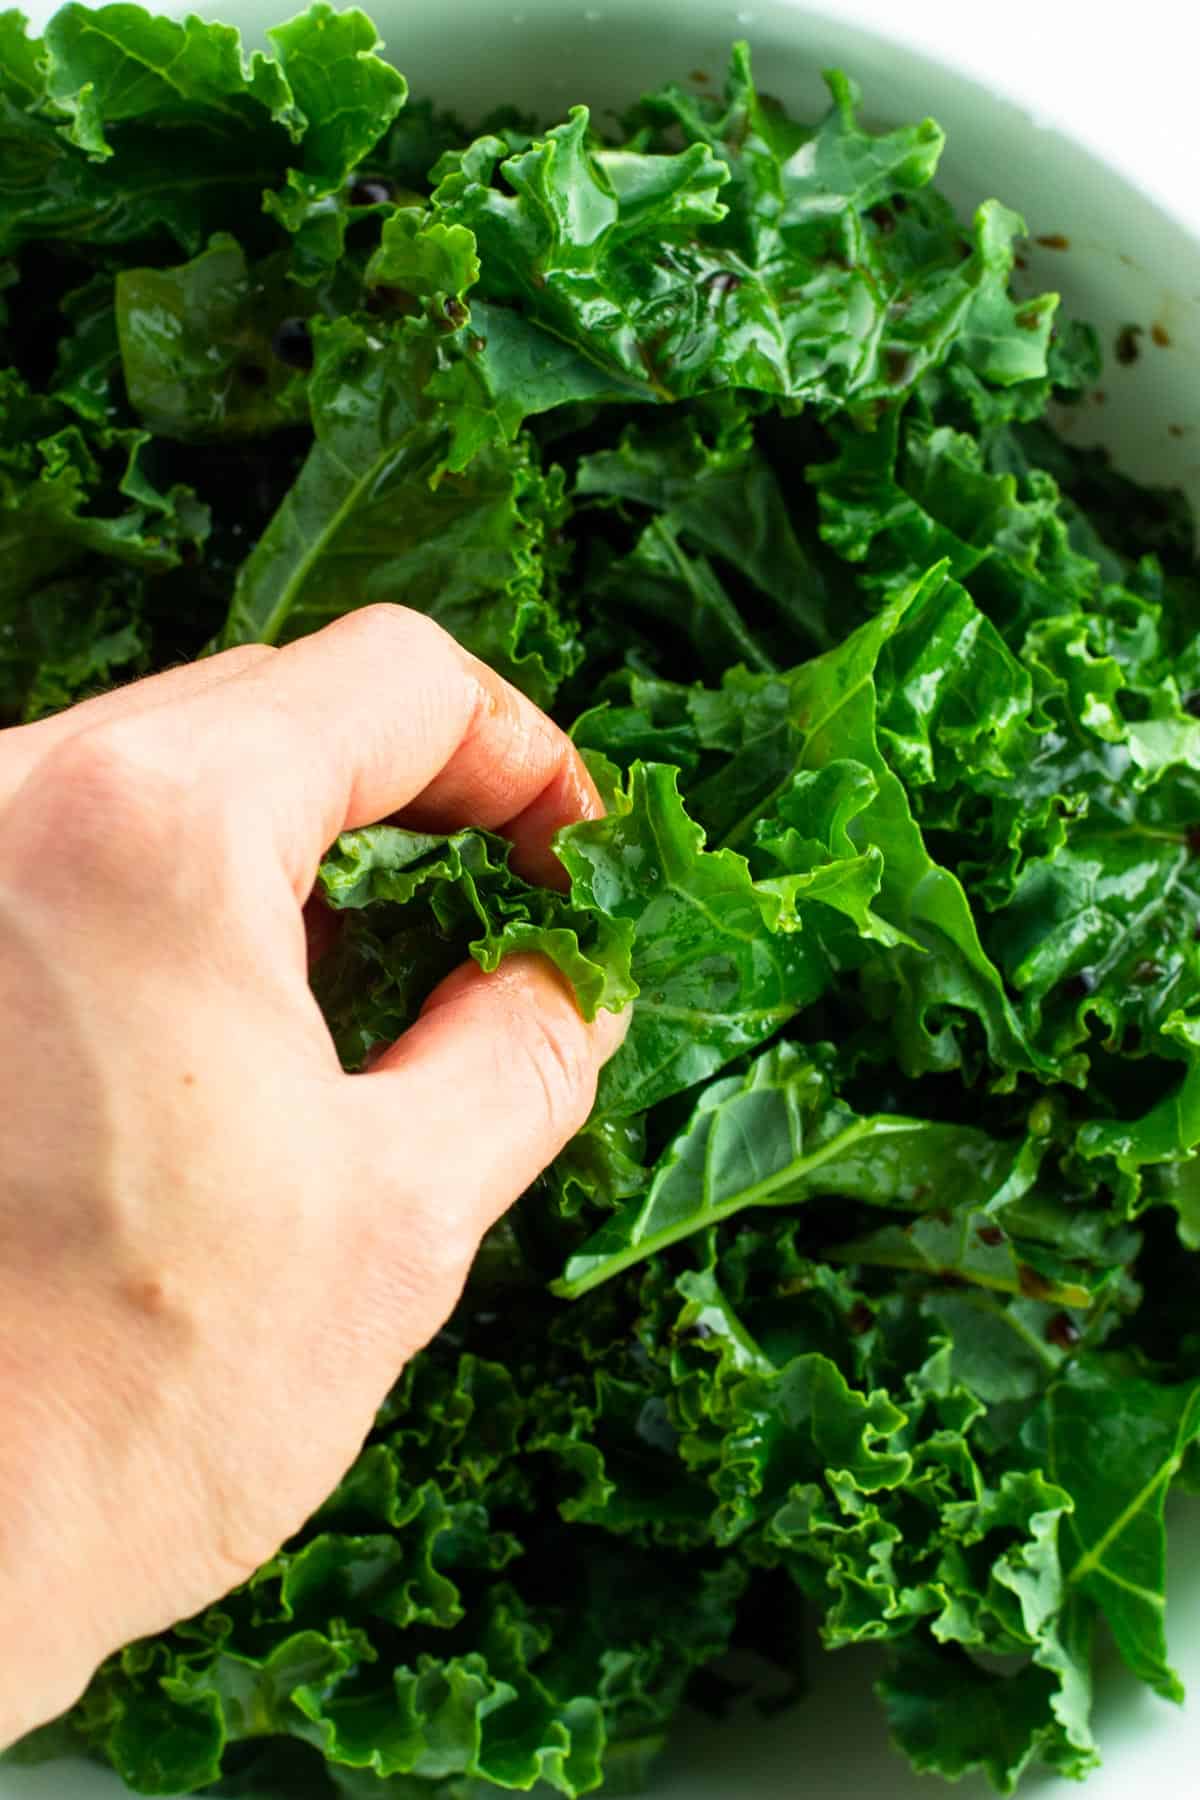 A hand massaging kale leaves with oil and balsamic vinegar.